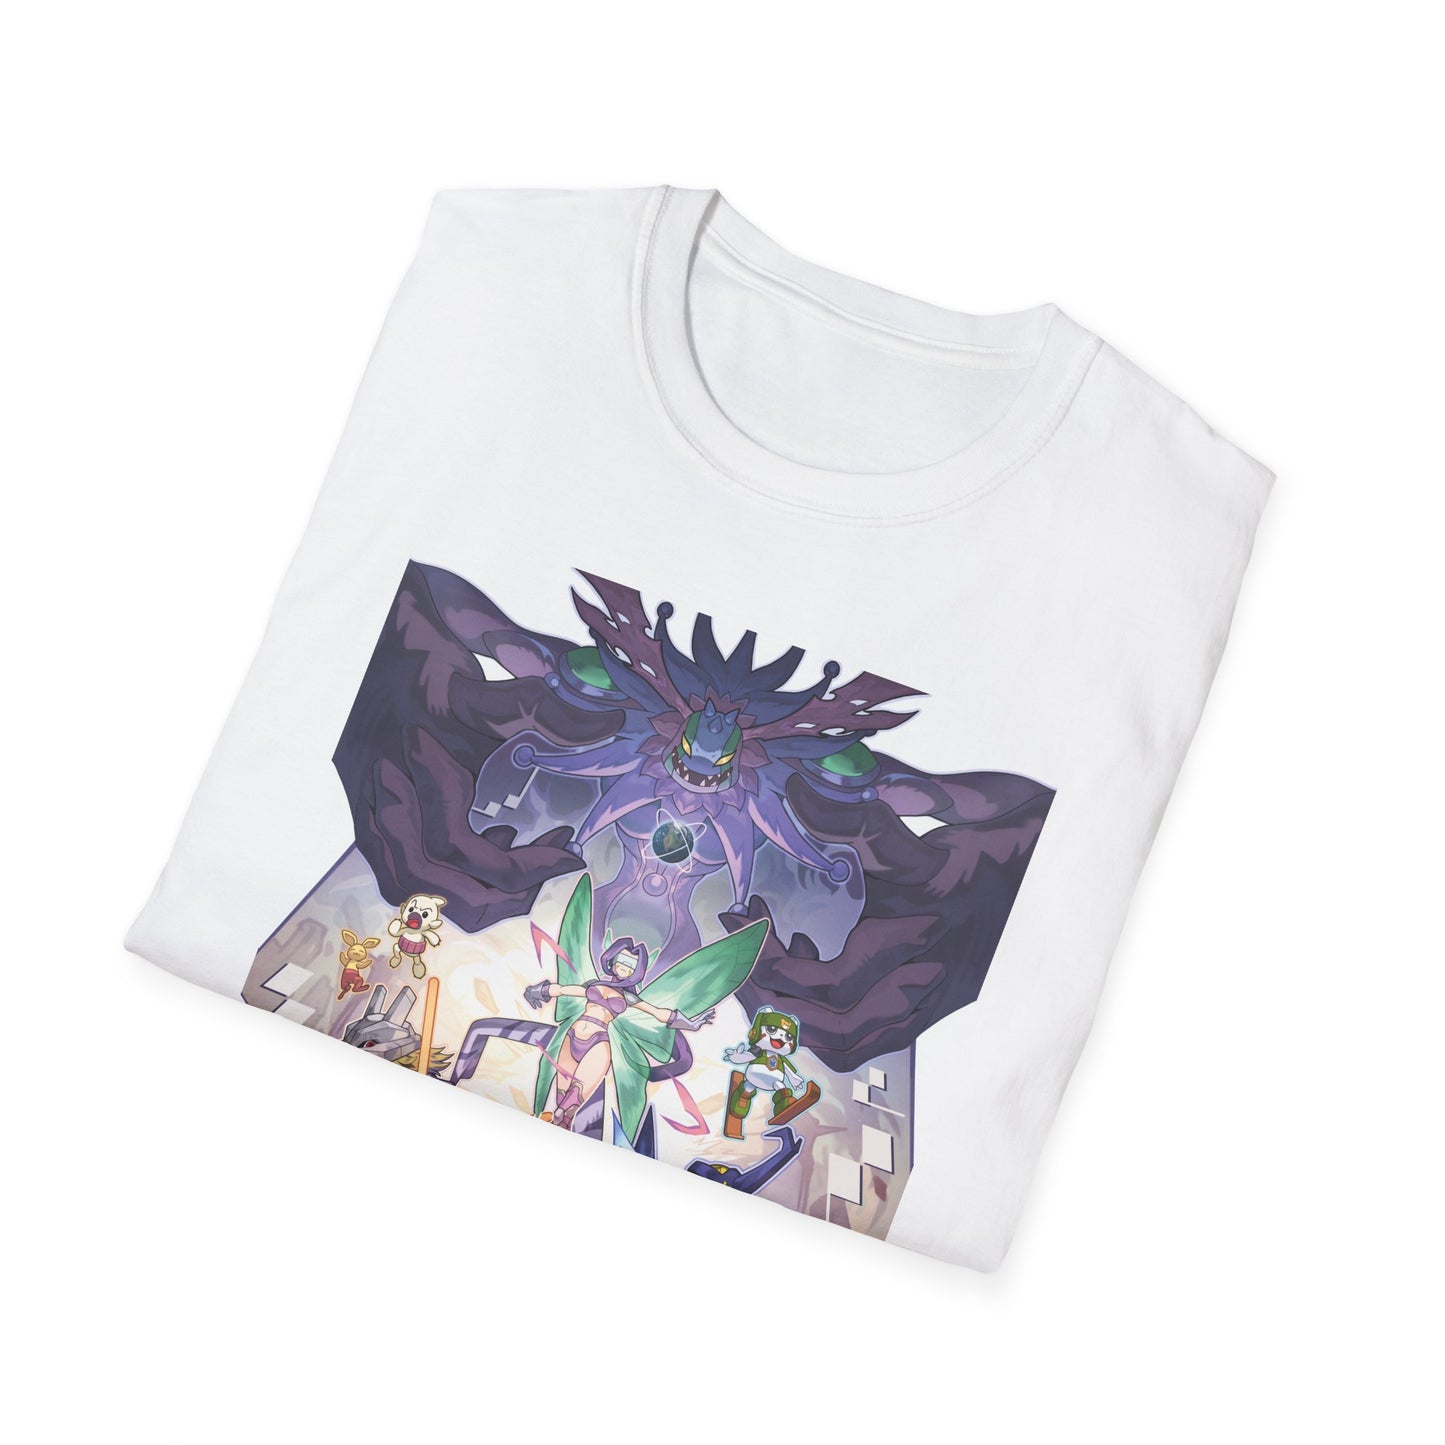 Digimon Frontier T-Shirt Design by Currynoodleart